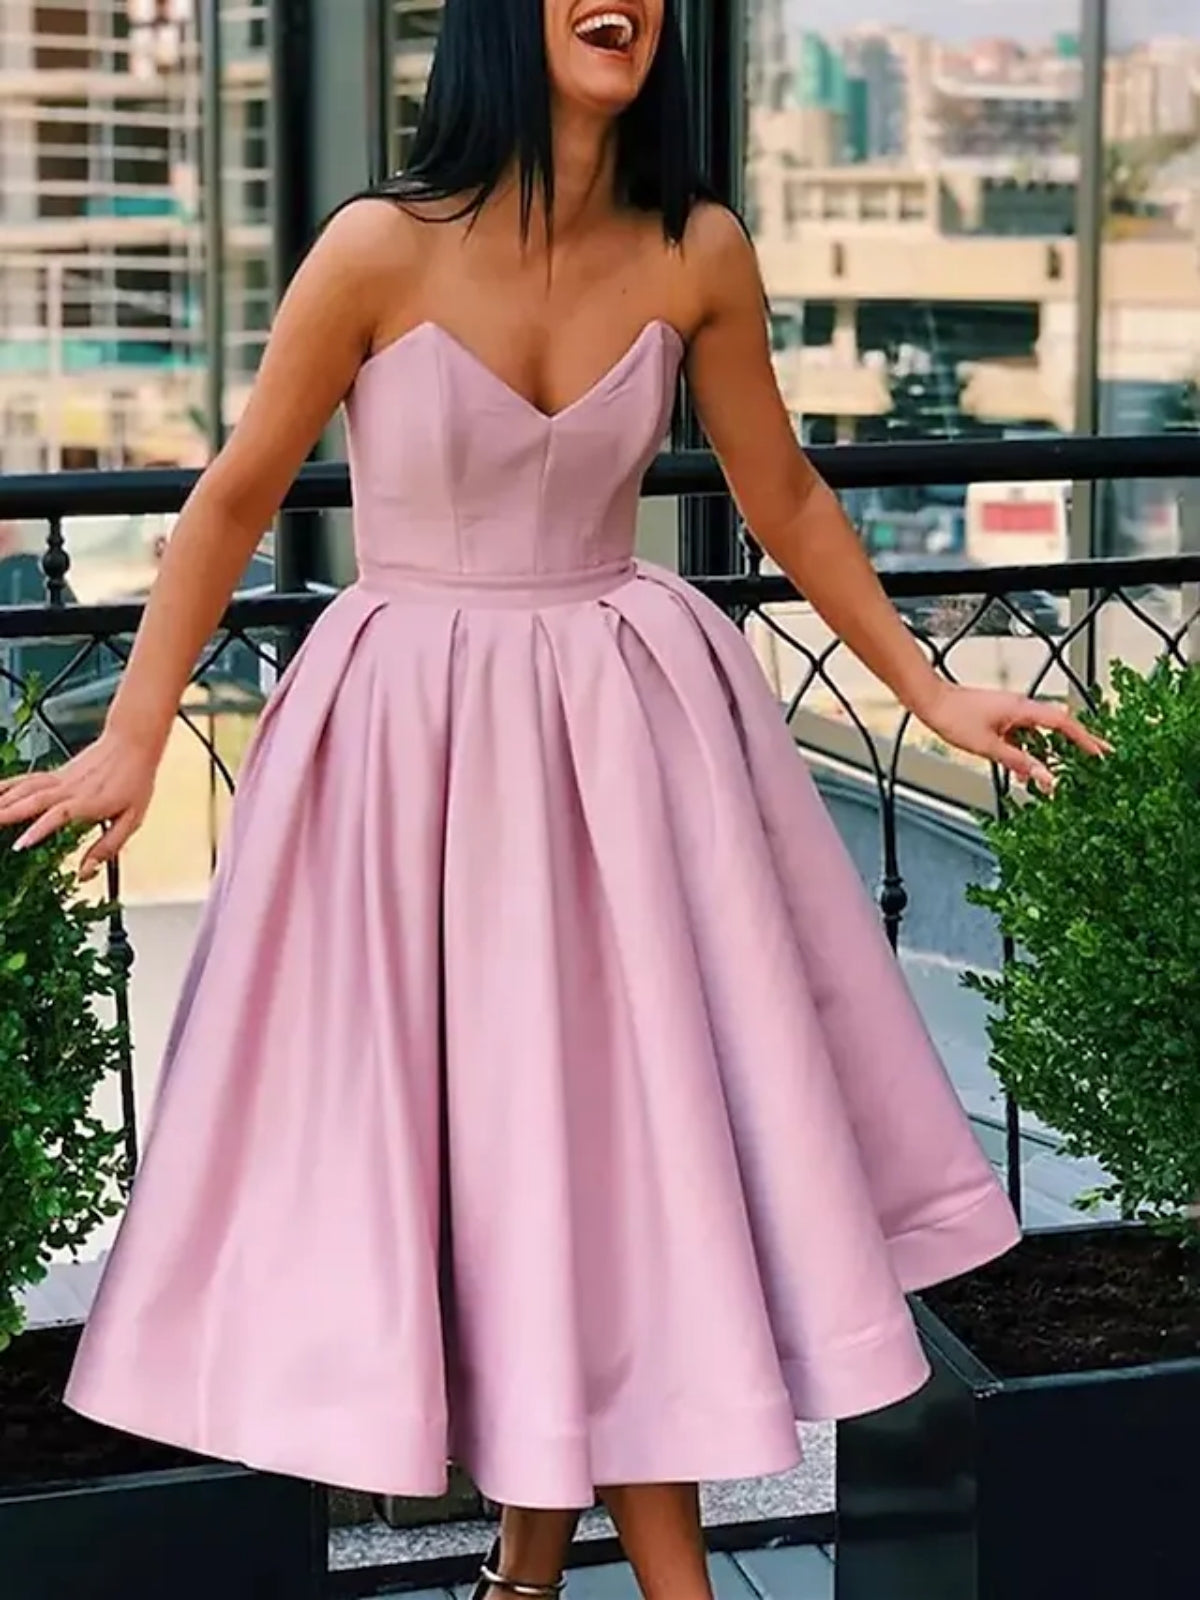 Strapless Tea Length Pink/Champagne Prom Homecoming Dresses, Pink/Champagne Formal Graduation Evening Dresses 